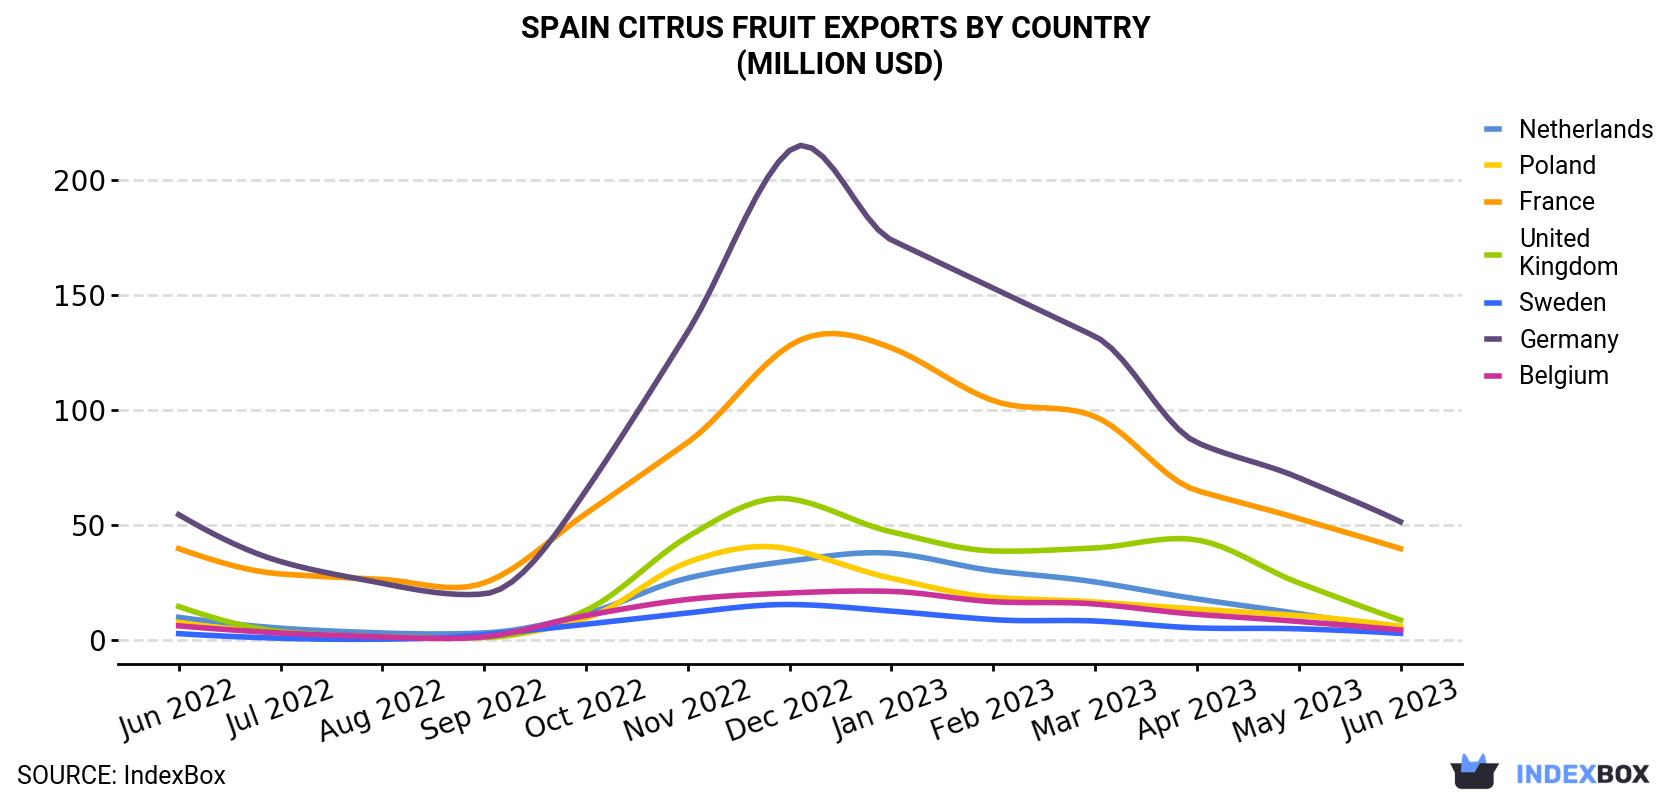 Spain Citrus Fruit Exports By Country (Million USD)